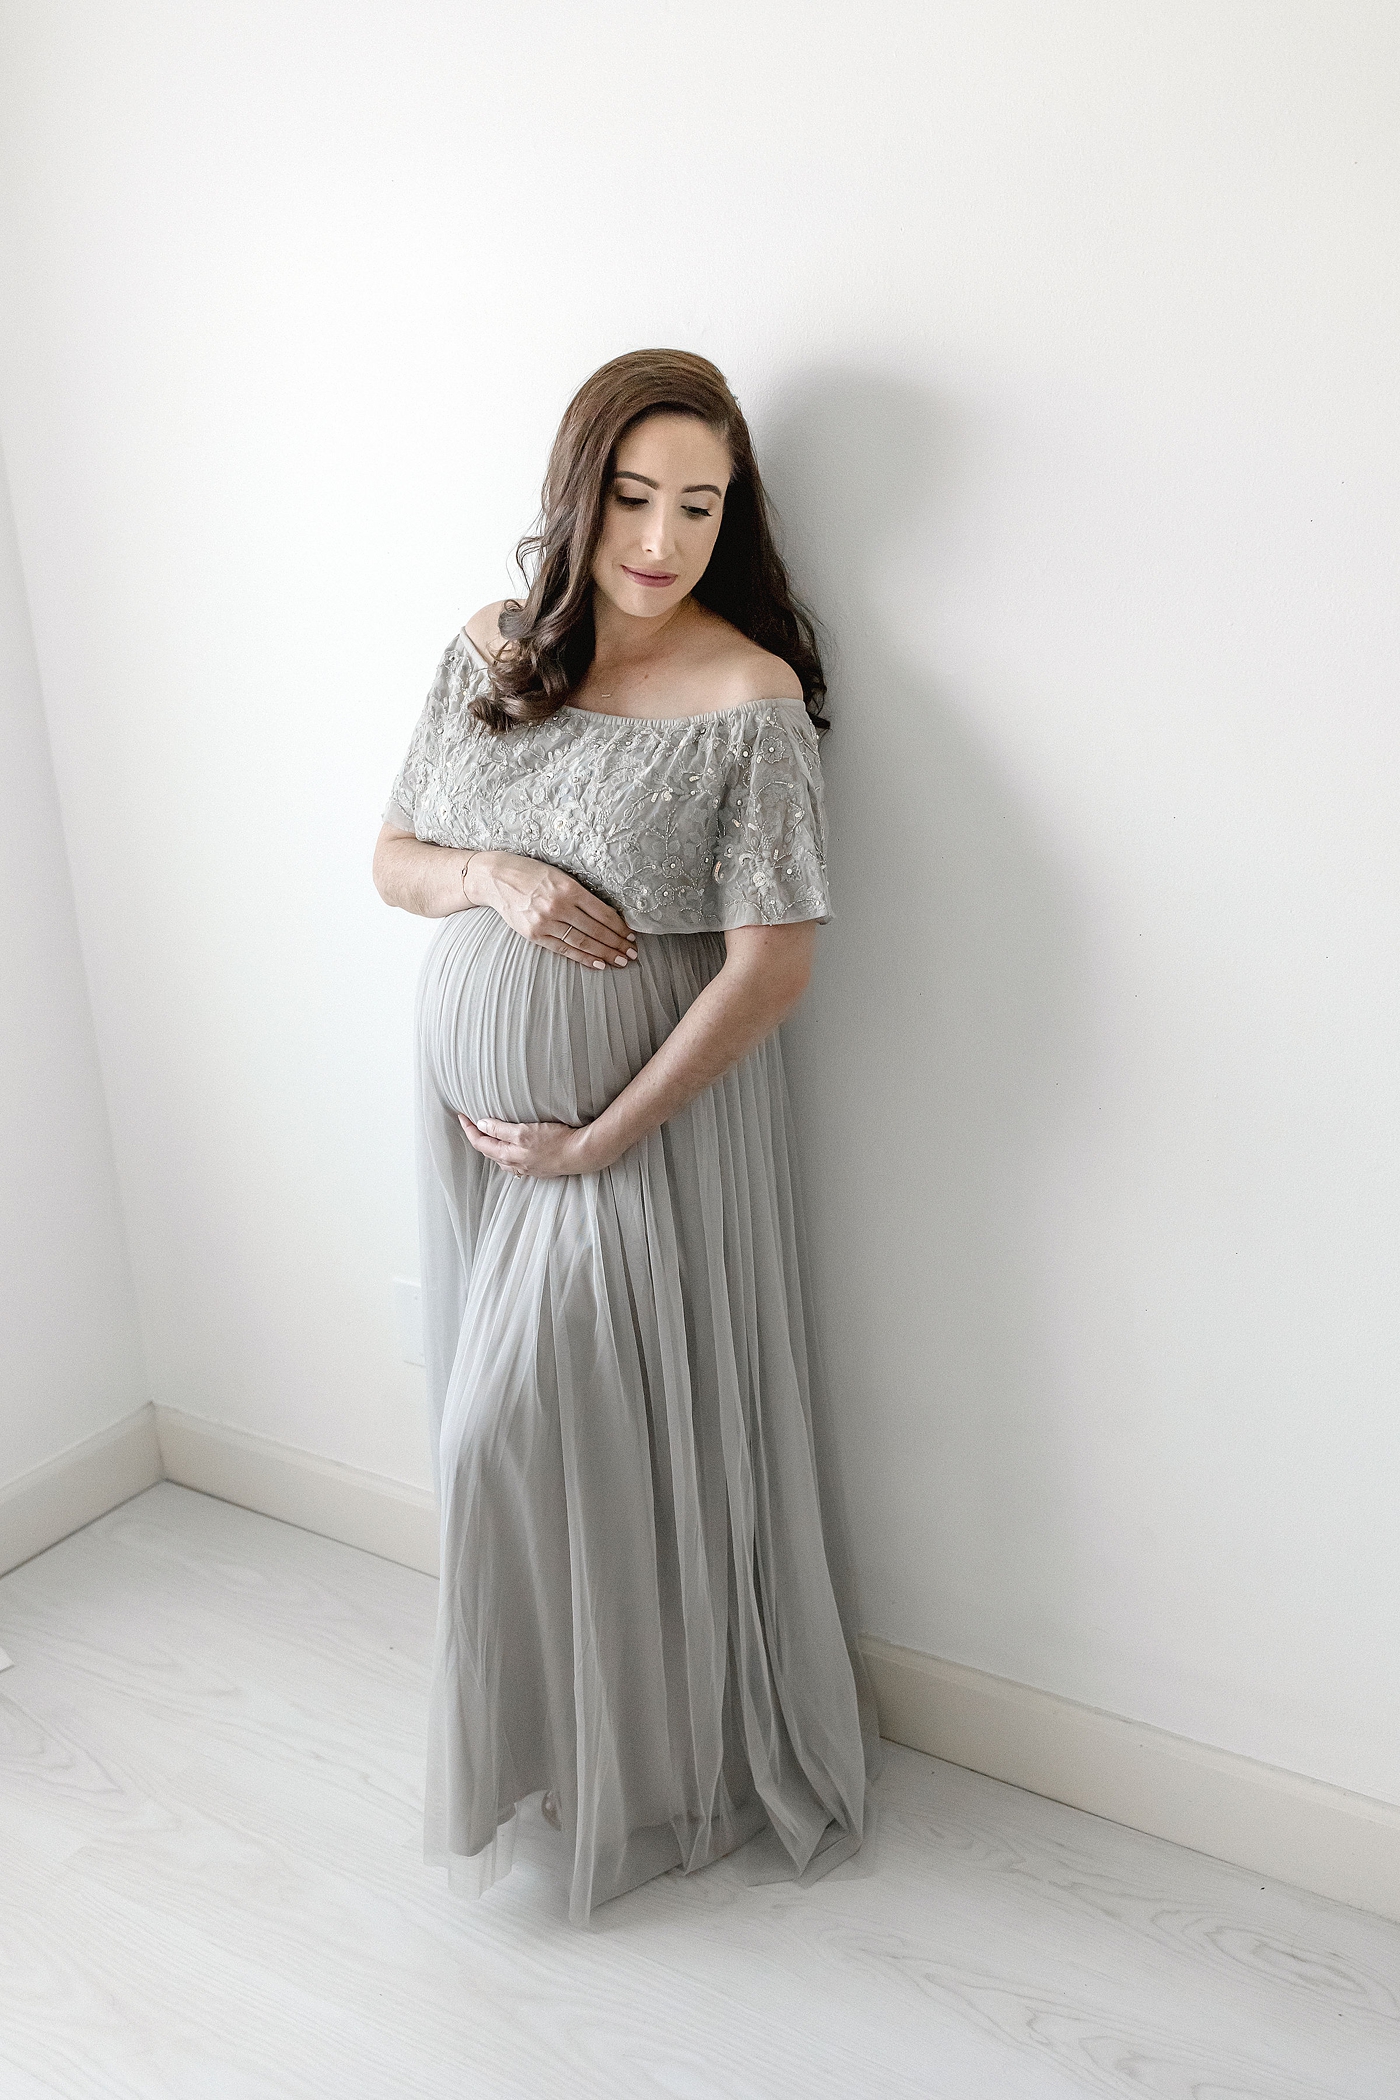 Mom to be holds her bump while leaning against wall during maternity session before headed to El Farito Beach Miami FL. Photo by Ivanna Vidal Photography.